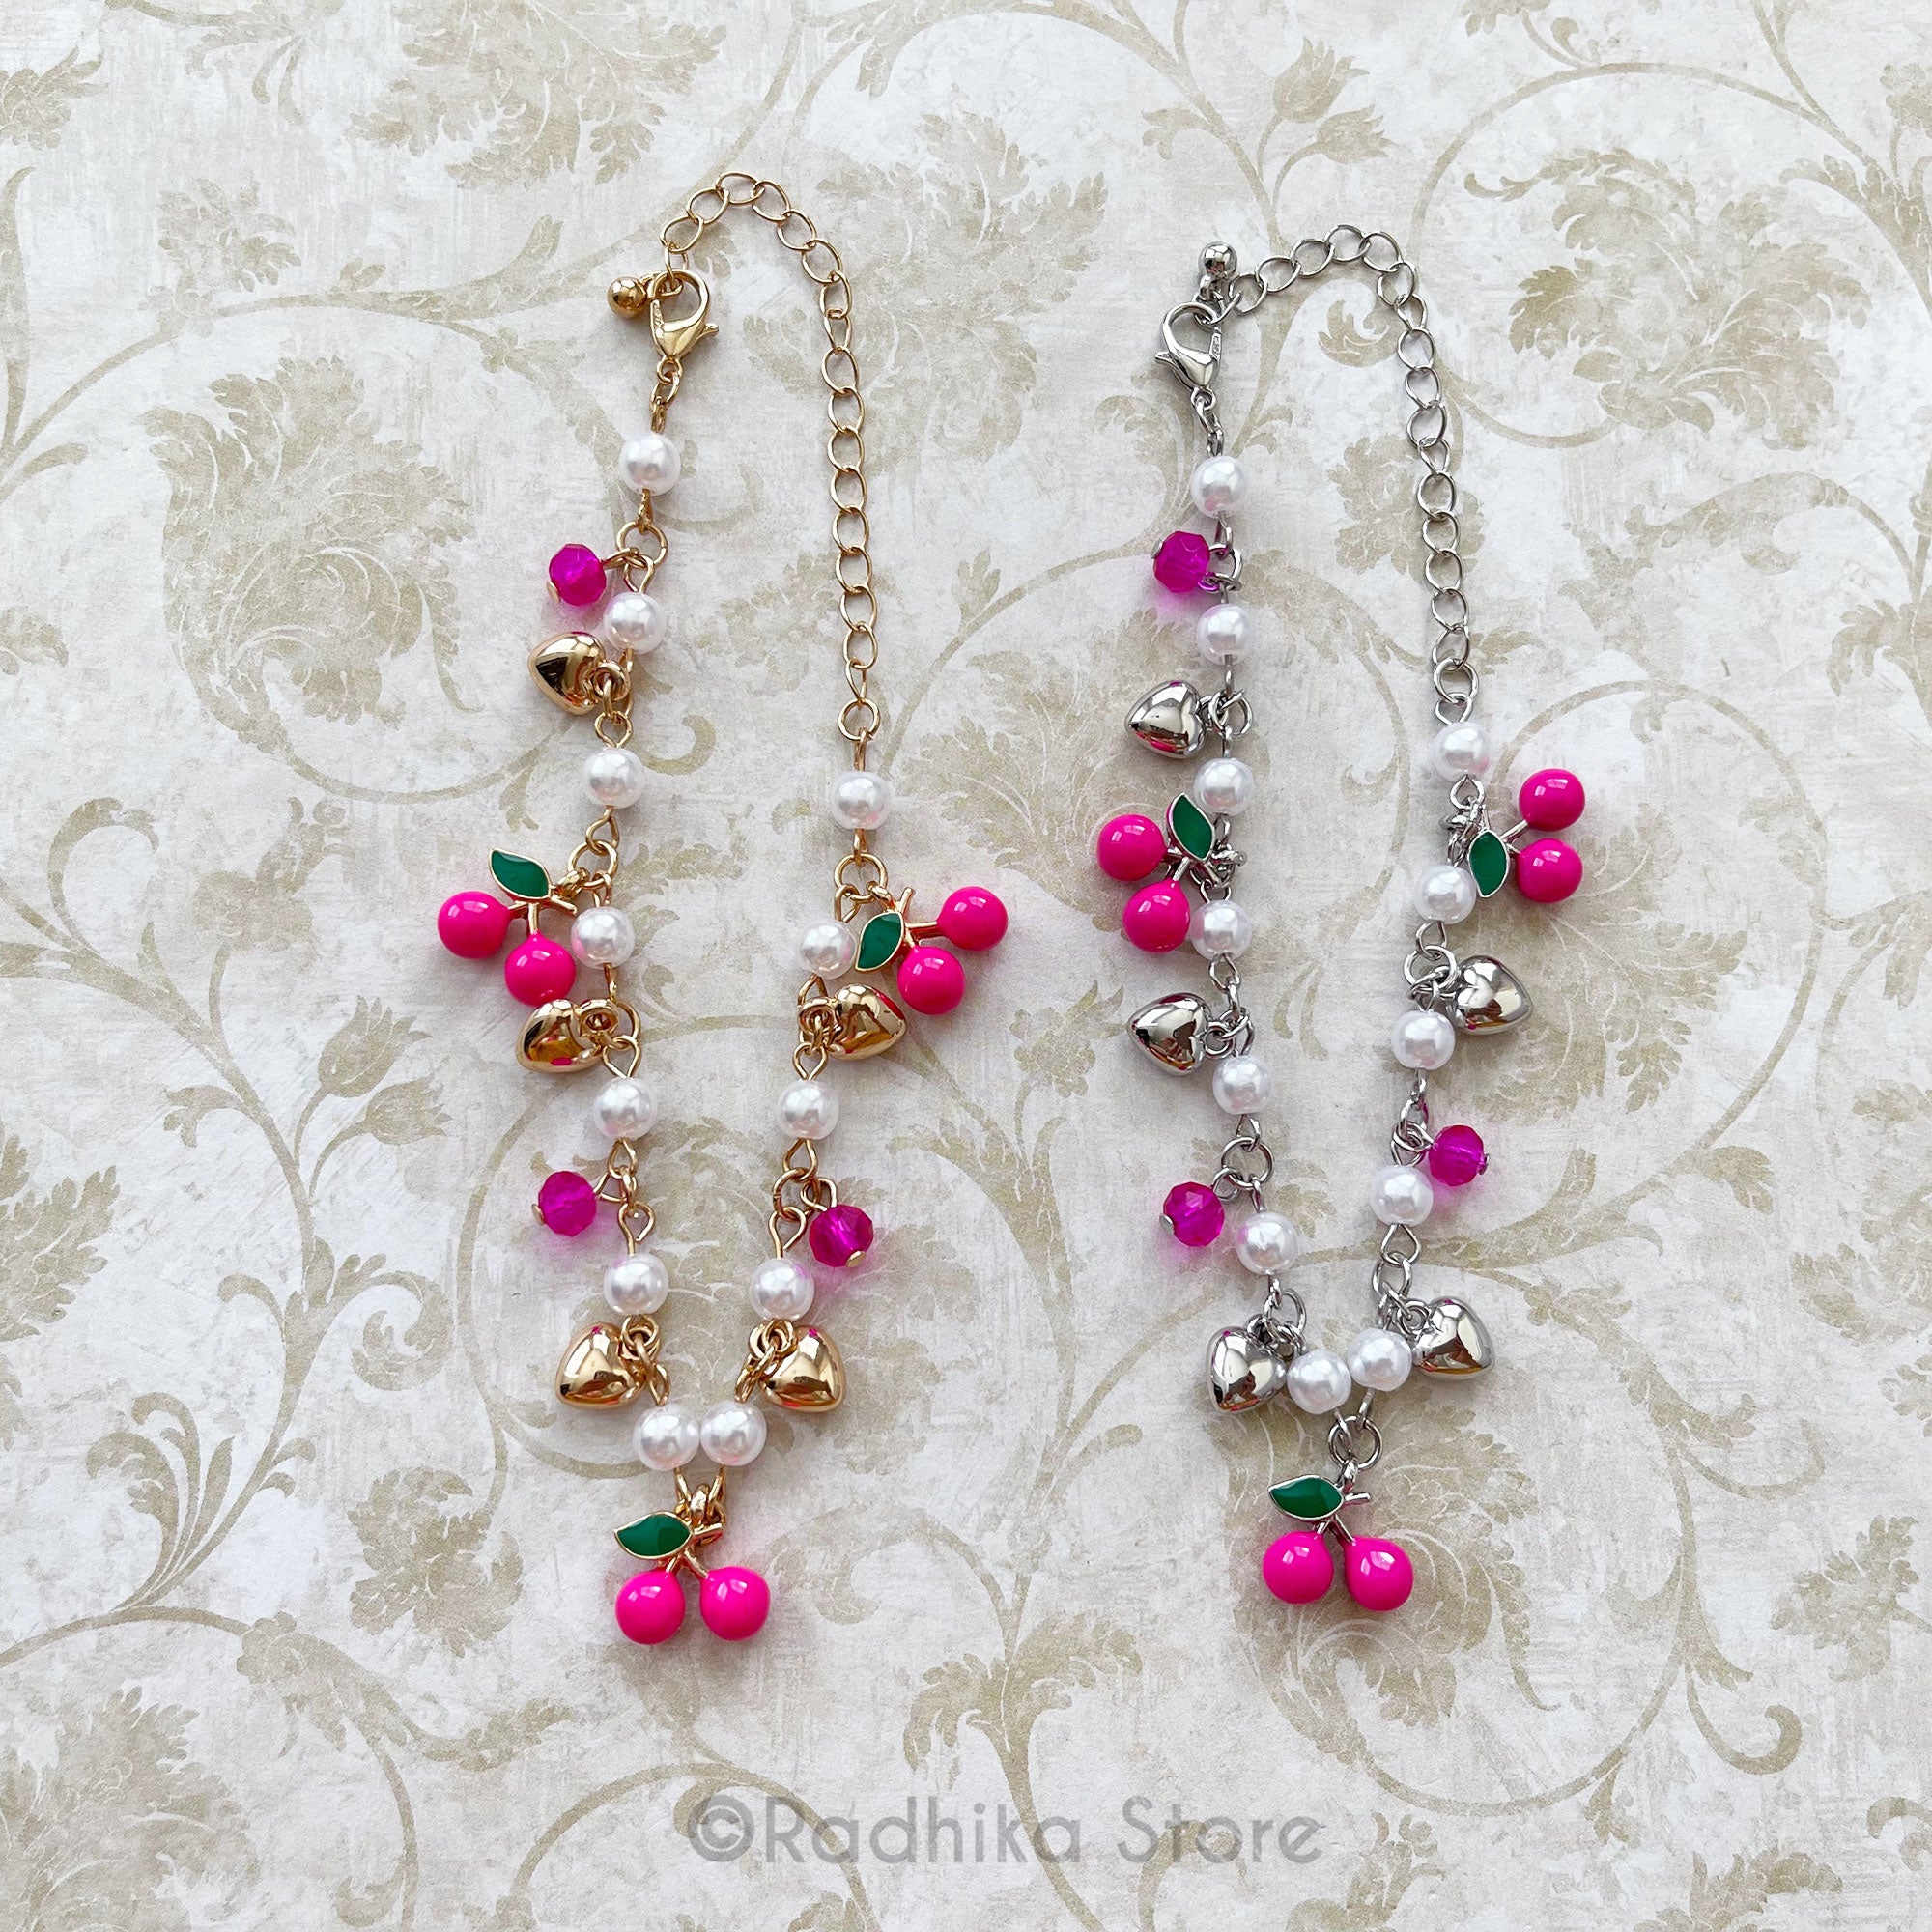 Pink Cherry Hearts With Pearls- Deity Necklace